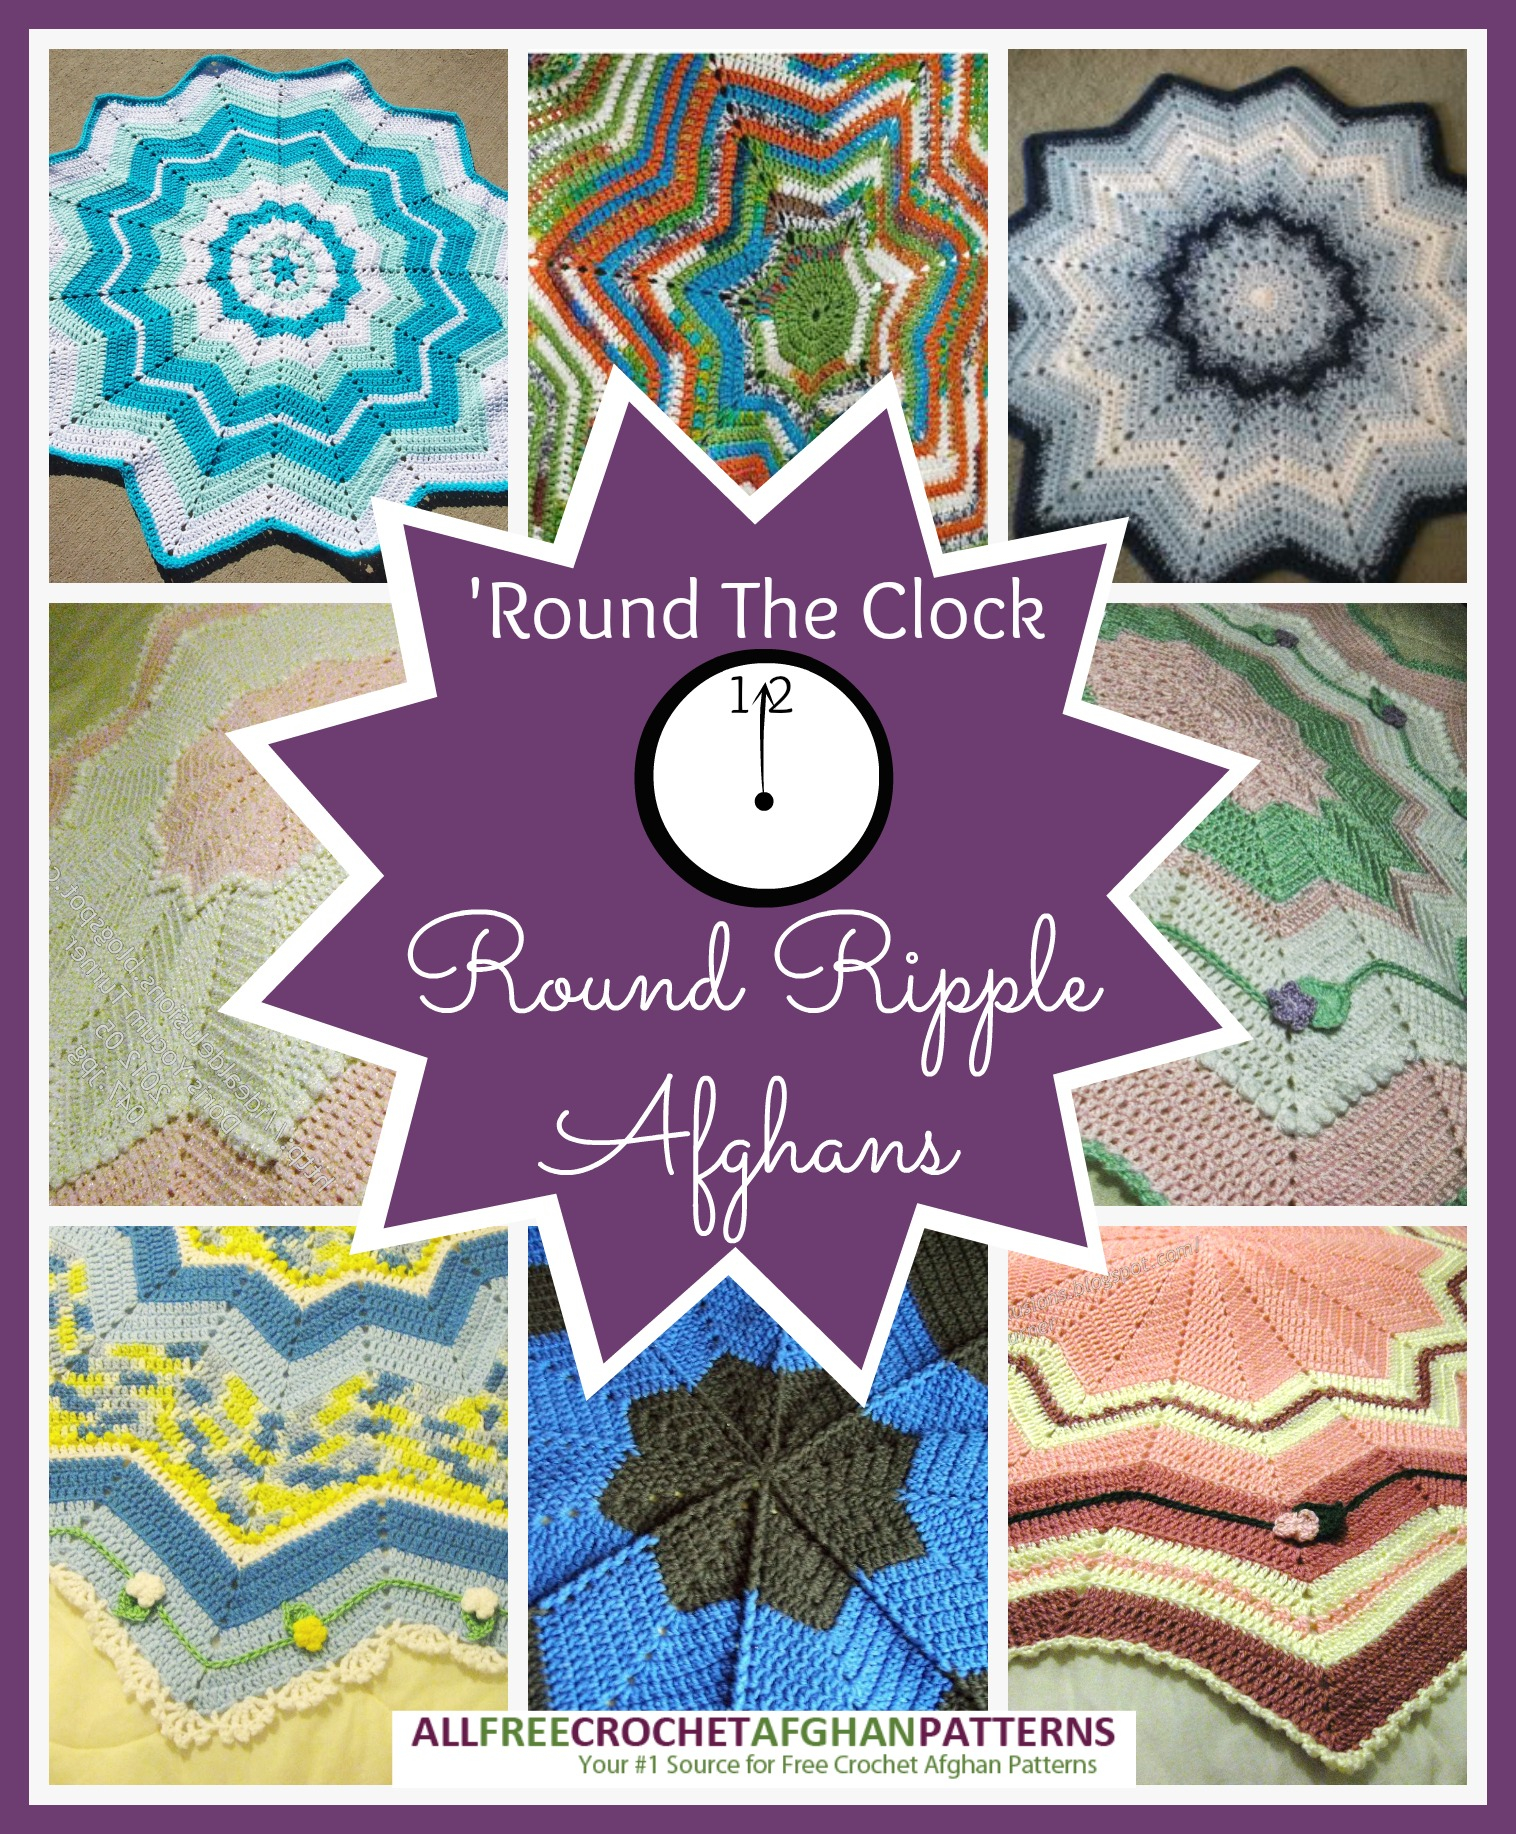 Free Crochet Ripple Afghan Pattern Round The Clock 12 Round Ripple Afghans Stitch And Unwind